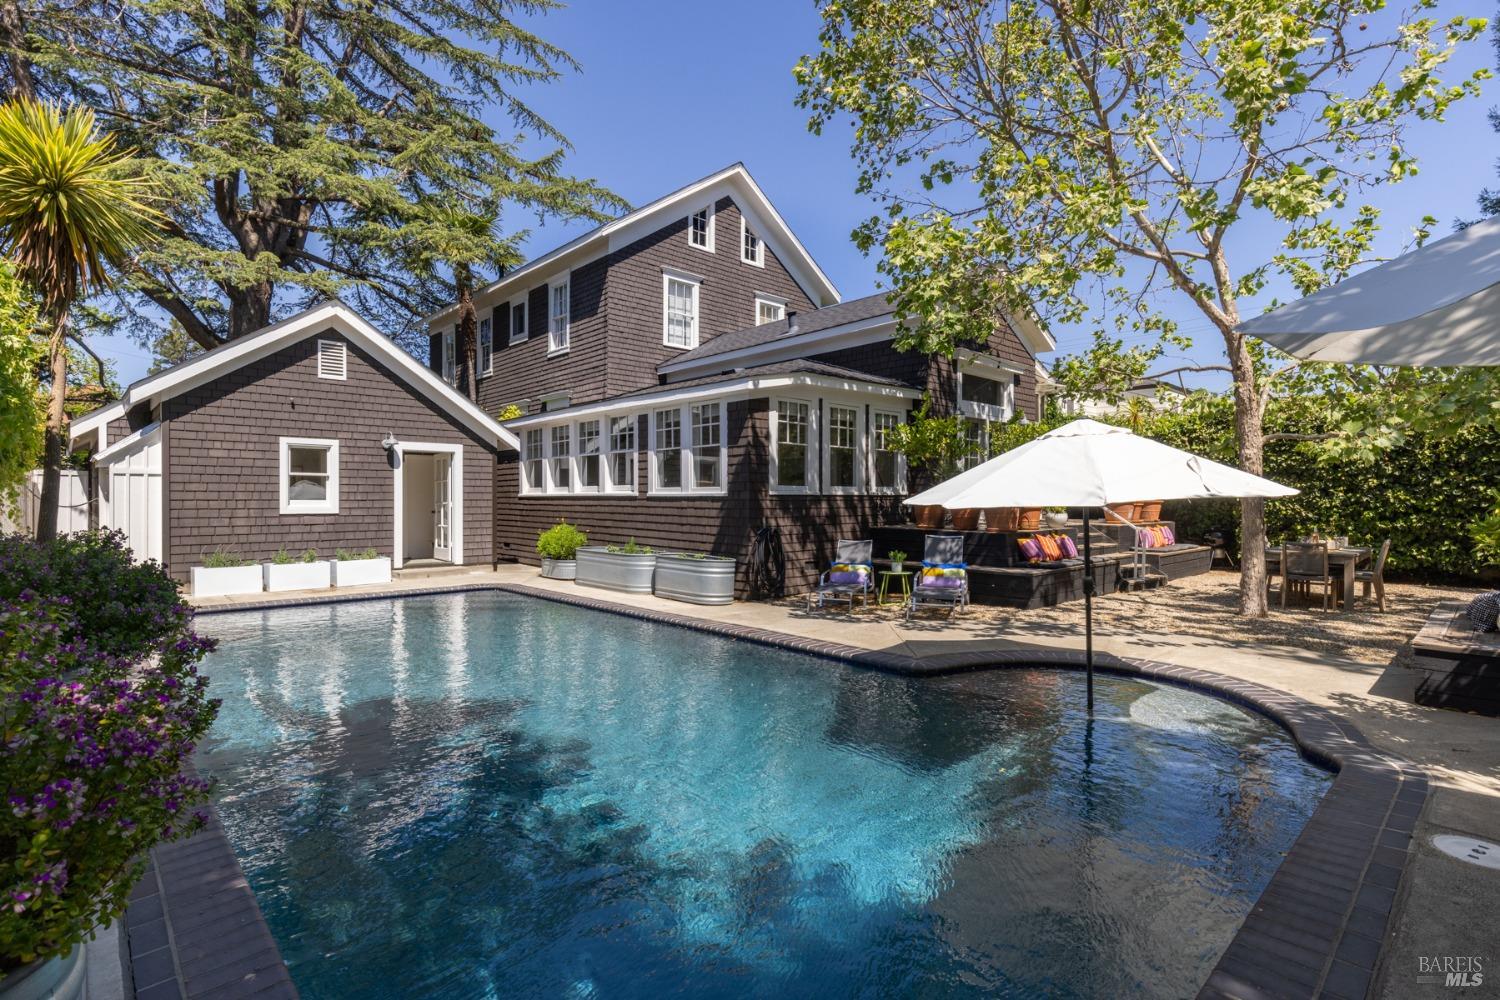 A beautifully modernized and restored historic home with inviting swimming pool in downtown Napa!